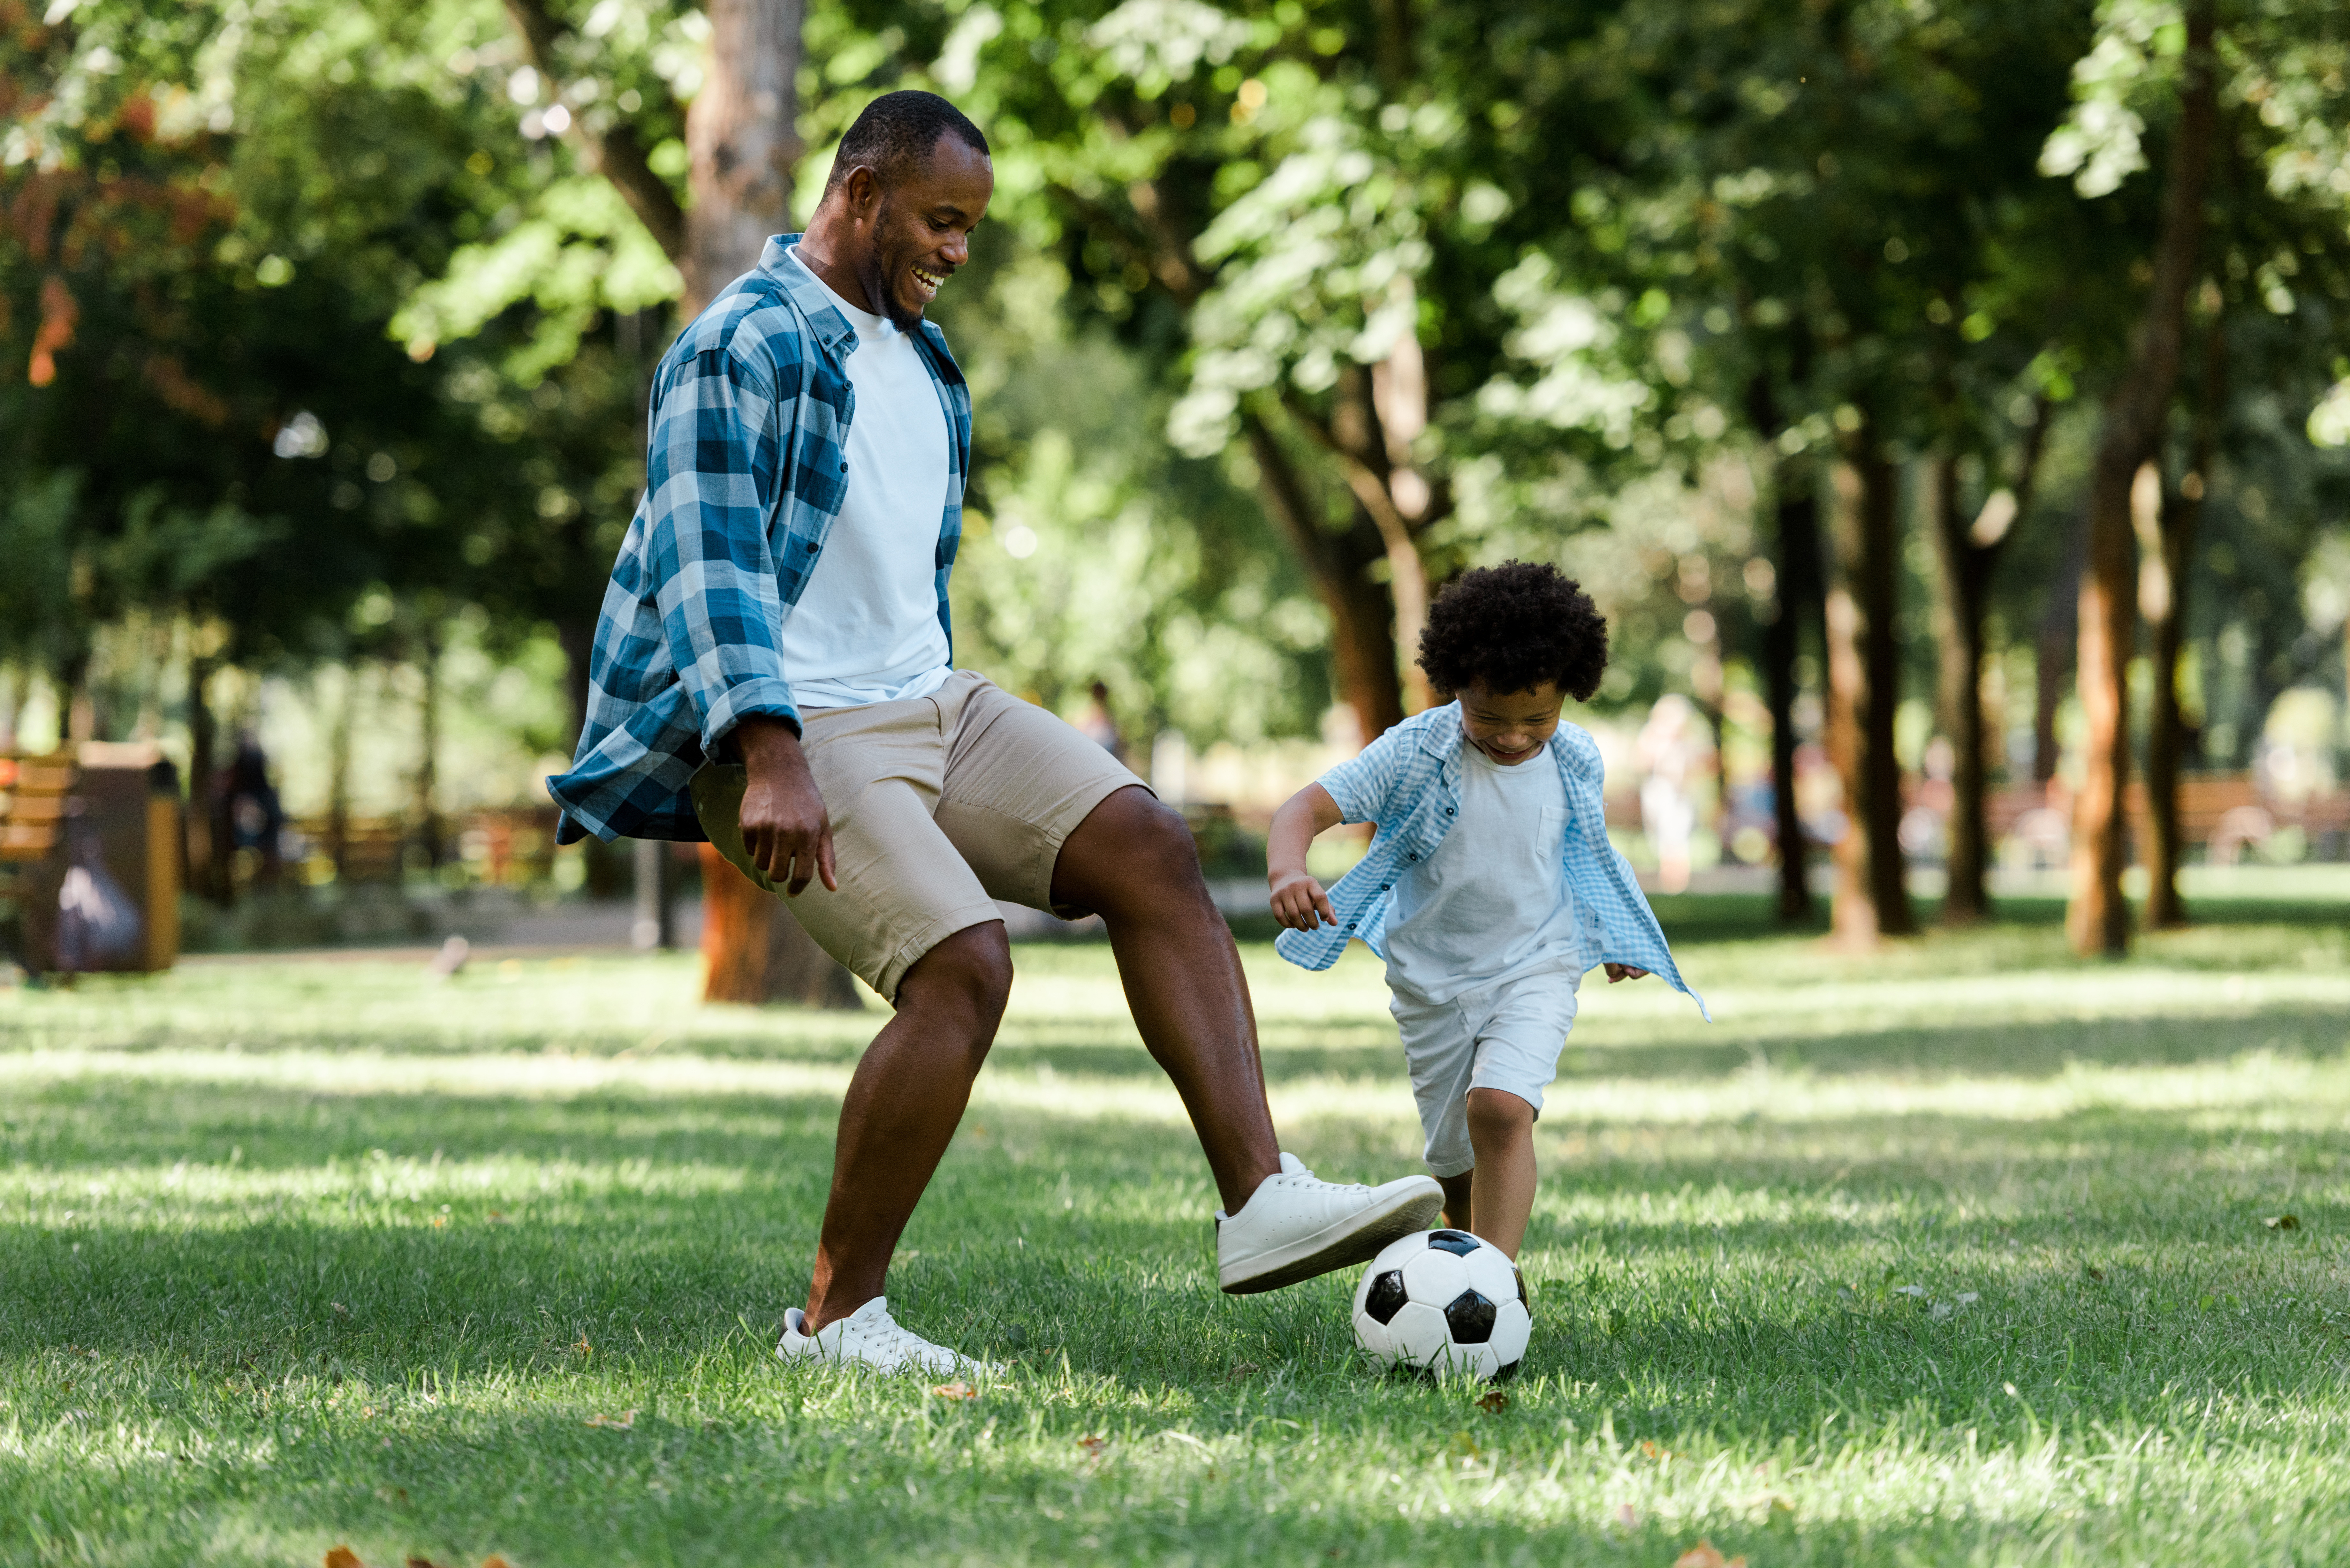 a man and boy play soccer in a park